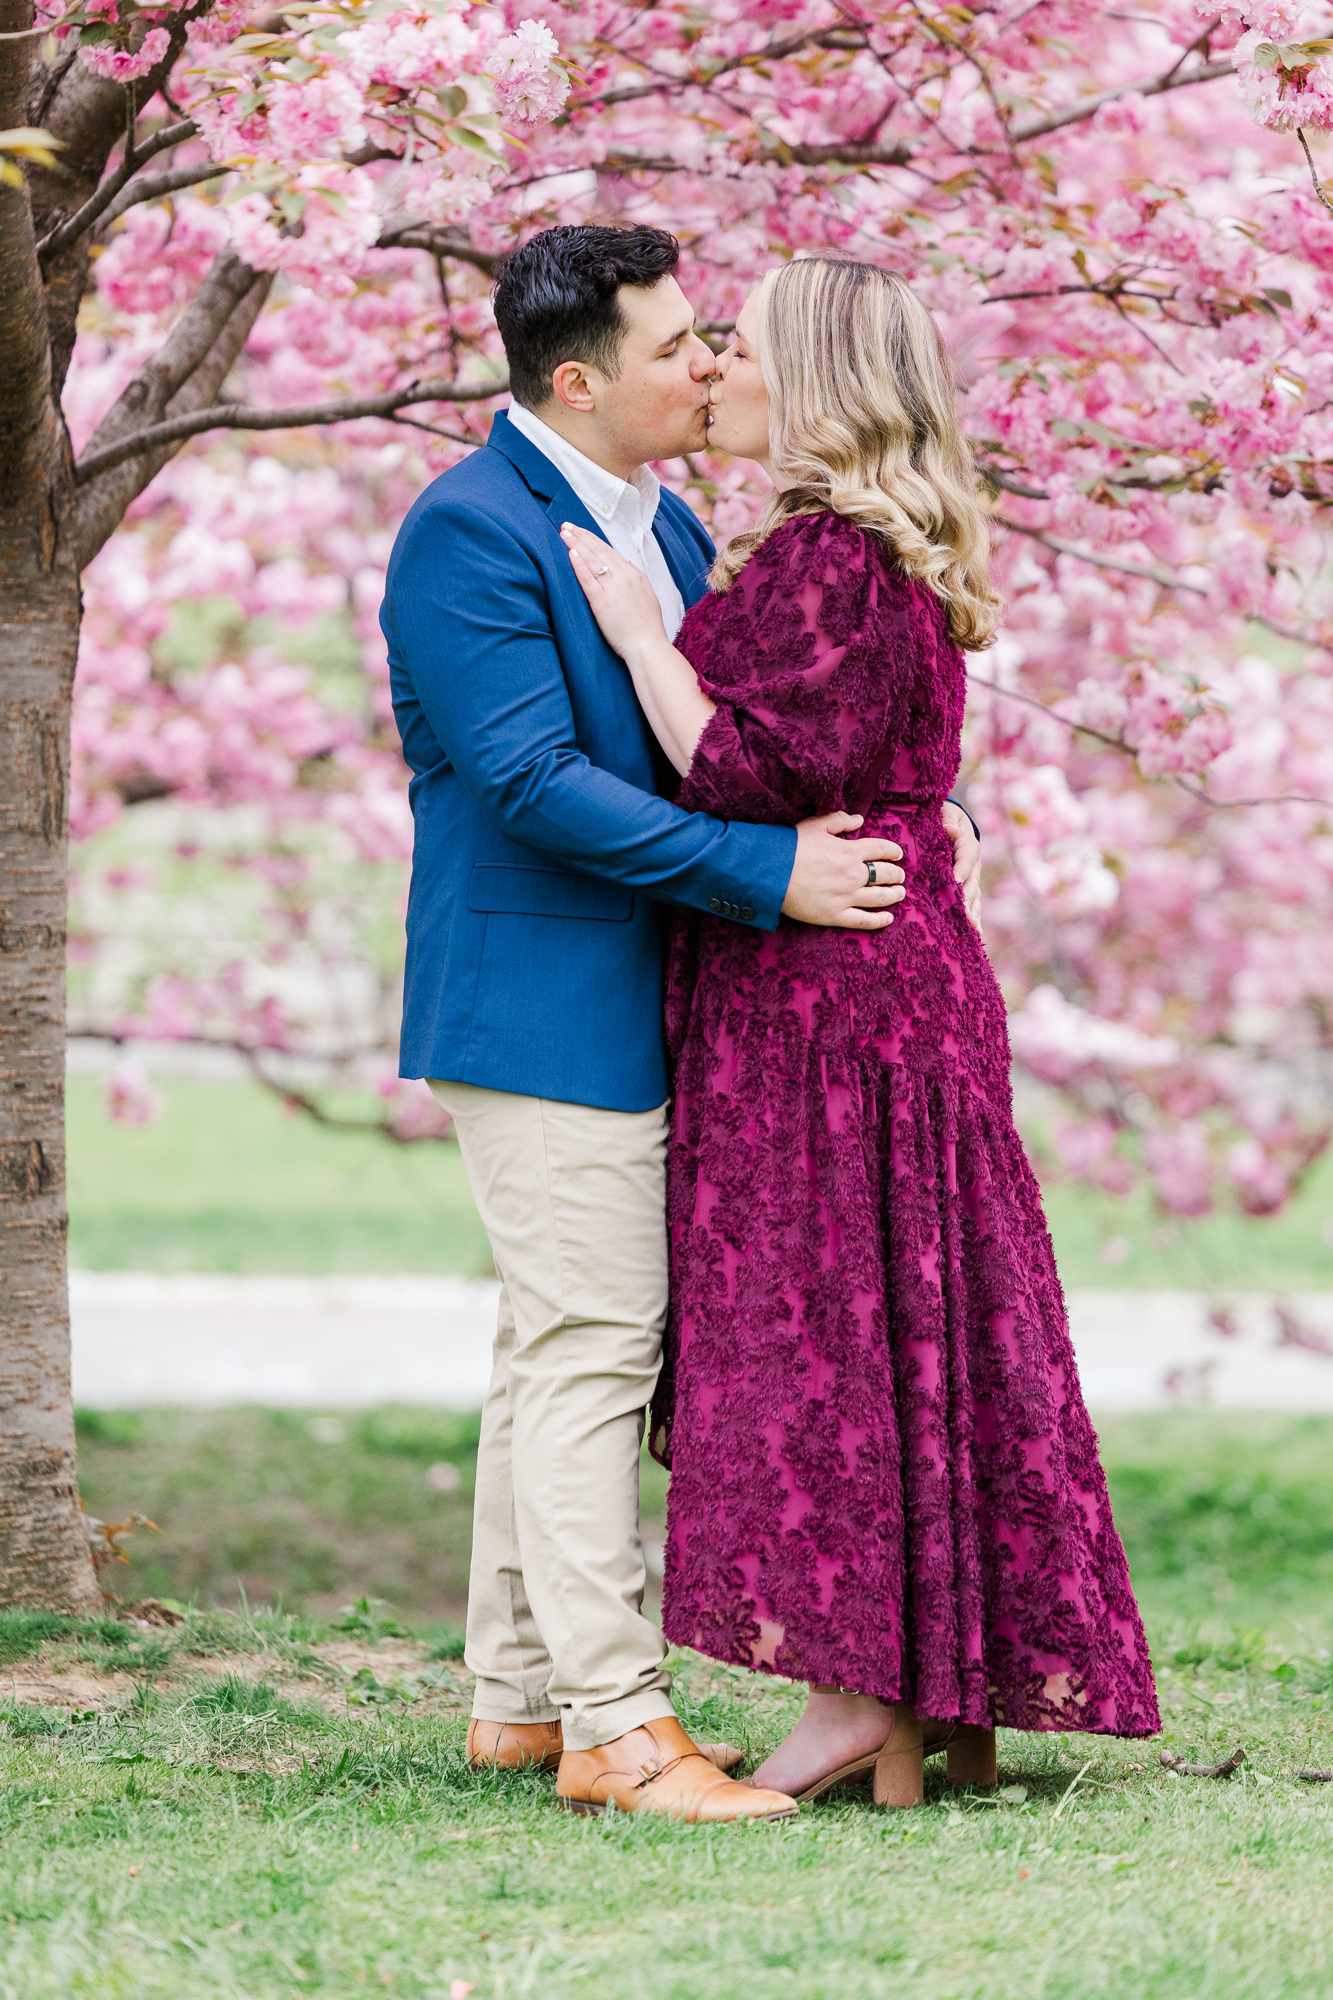 Breathtaking Engagement Pictures in Central Park